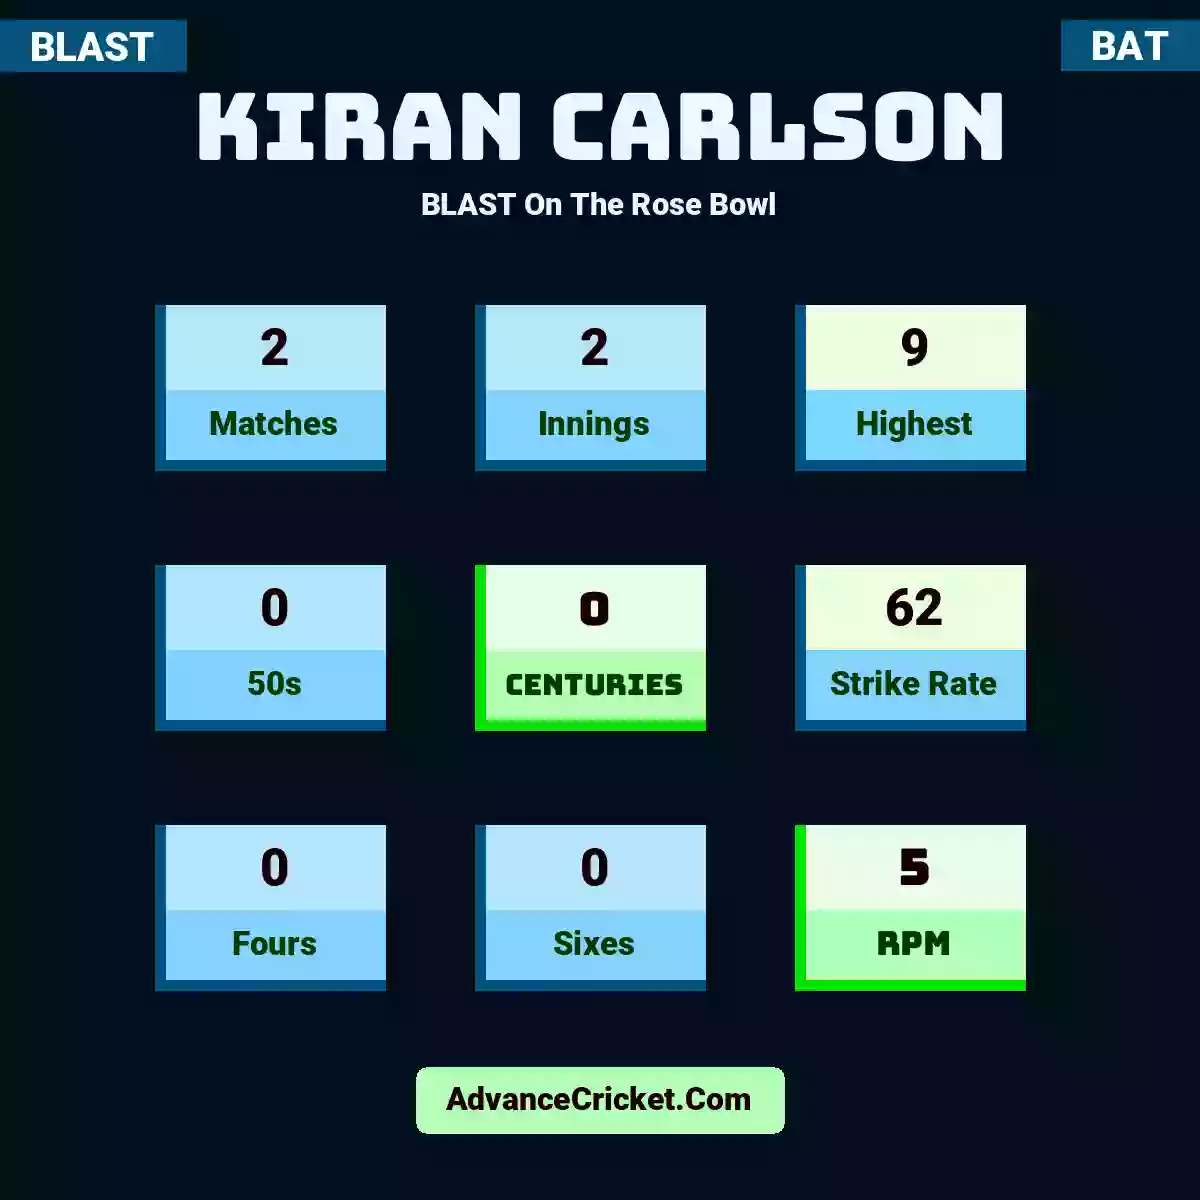 Kiran Carlson BLAST  On The Rose Bowl, Kiran Carlson played 2 matches, scored 9 runs as highest, 0 half-centuries, and 0 centuries, with a strike rate of 62. K.Carlson hit 0 fours and 0 sixes, with an RPM of 5.